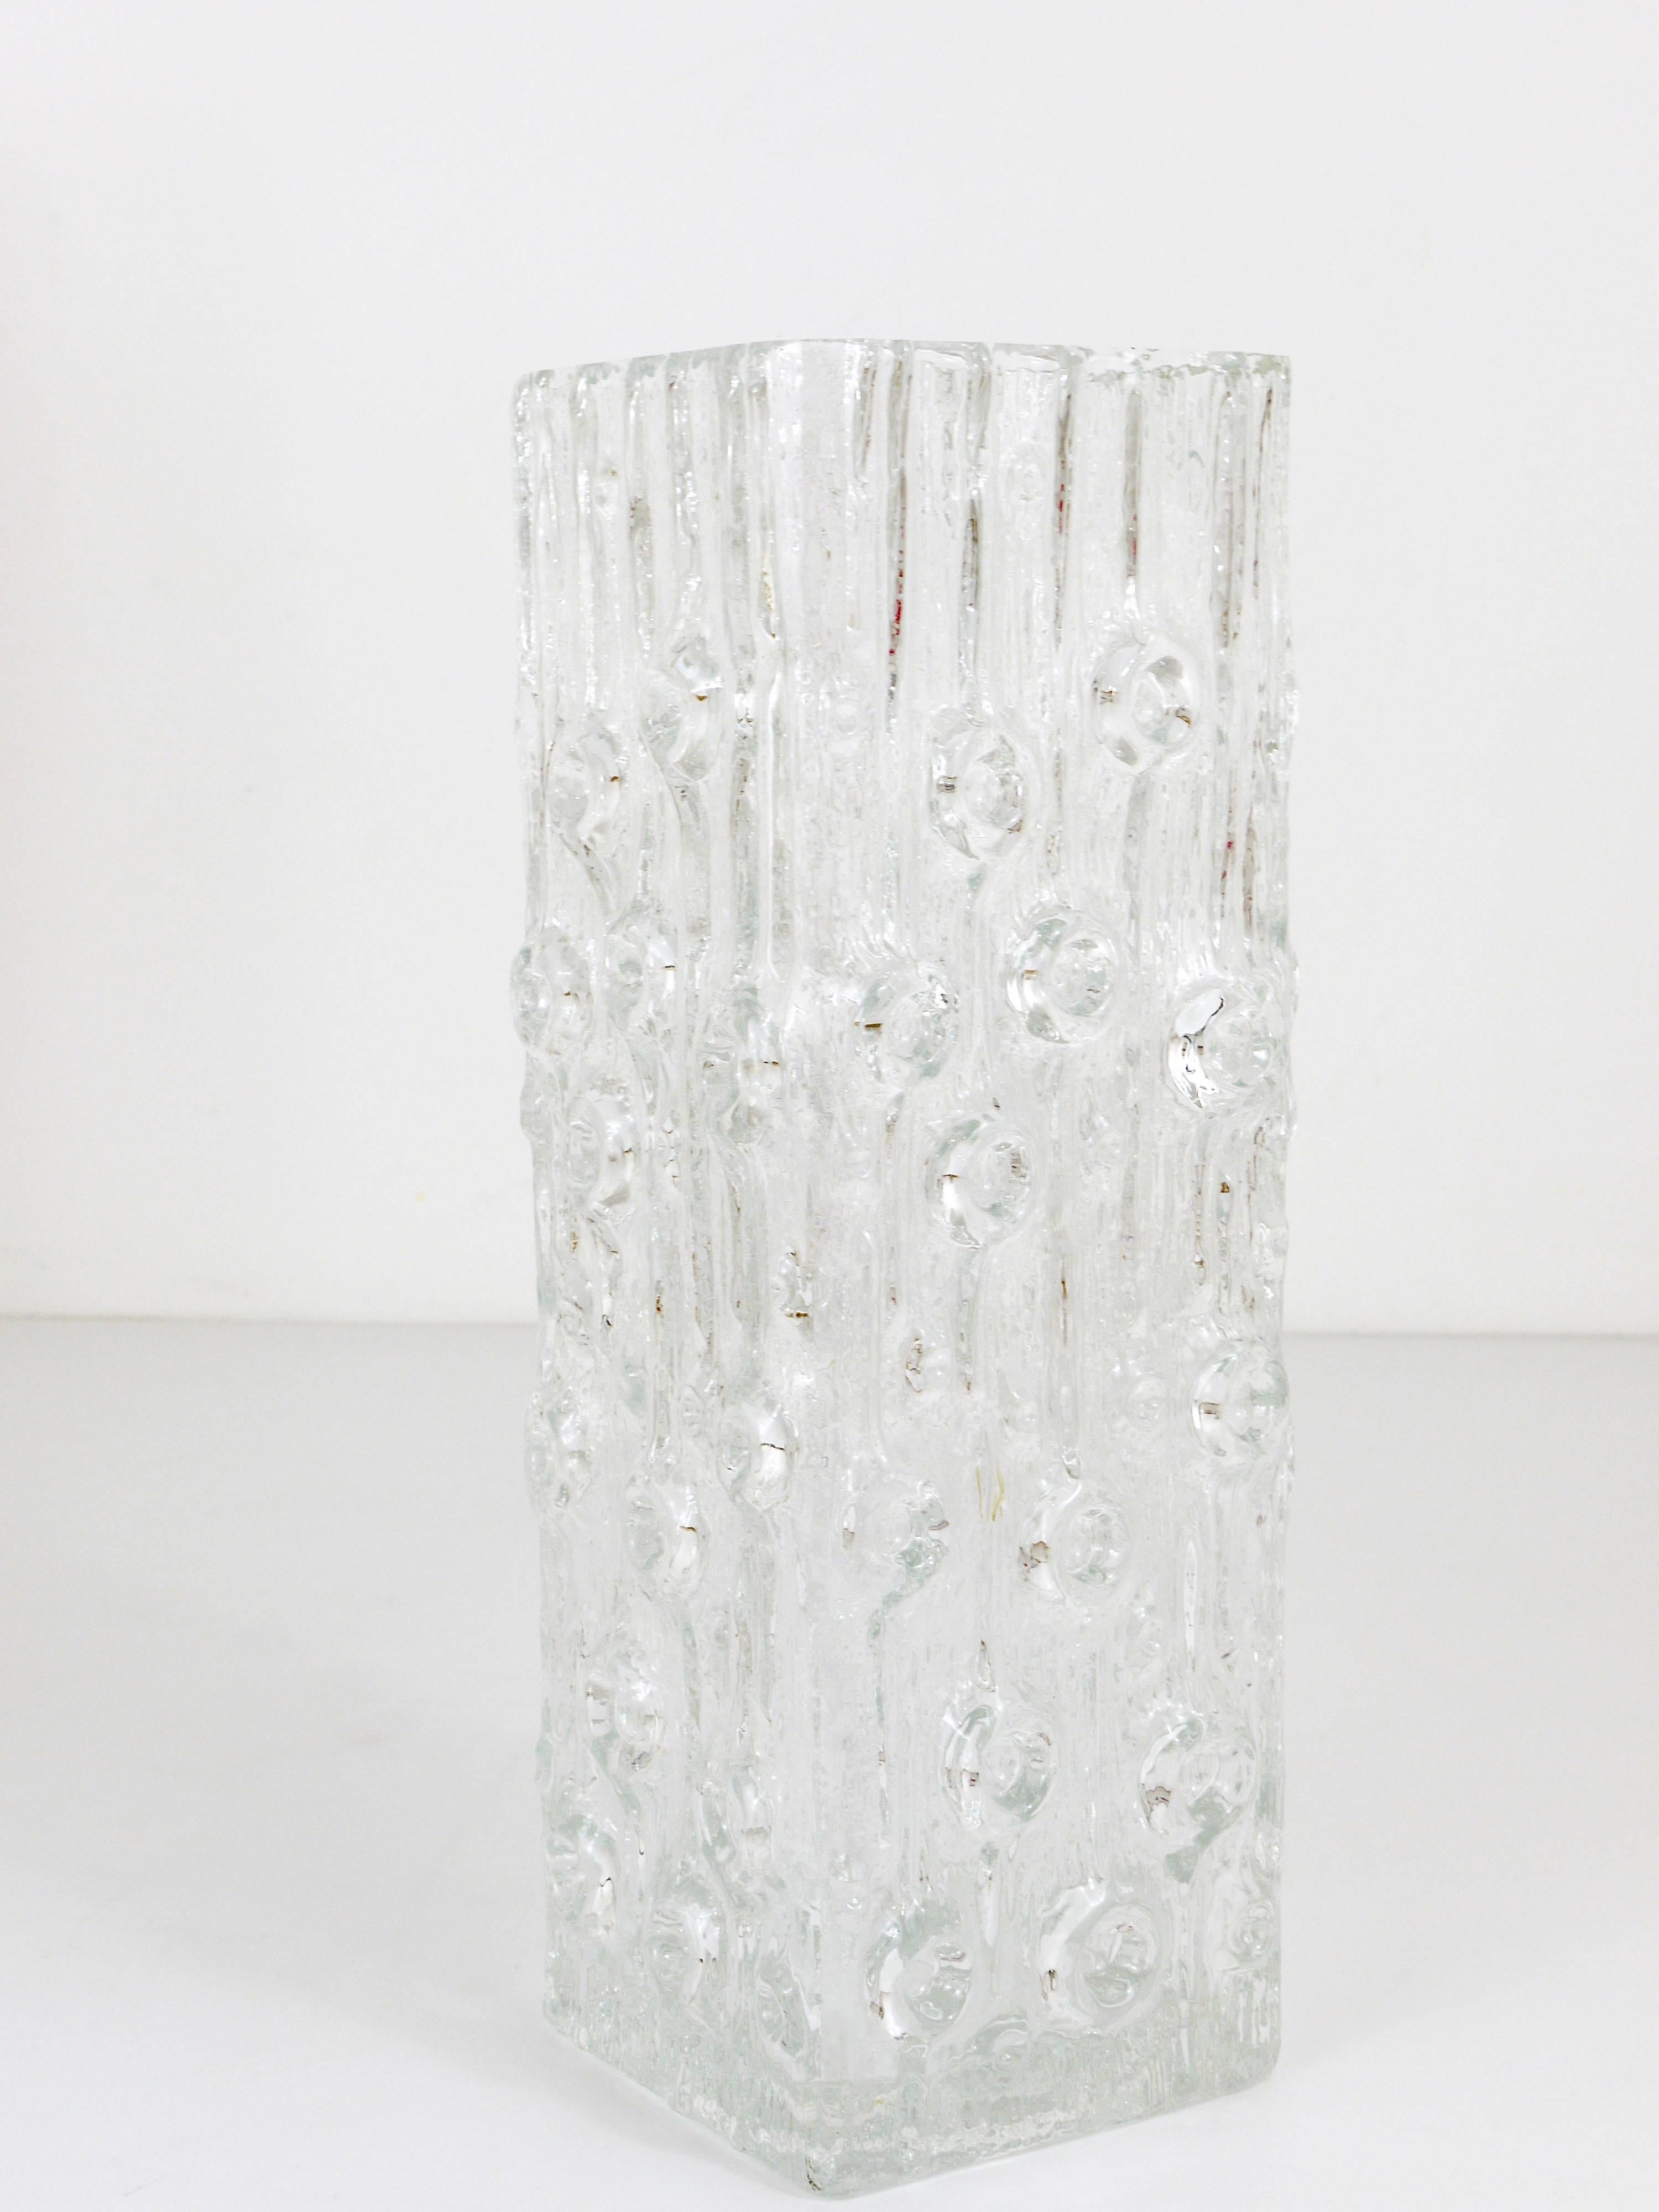 Peill & Putzler Op Art Square Modernist Ice Glass Vase, Germany, 1970s In Good Condition For Sale In Vienna, AT